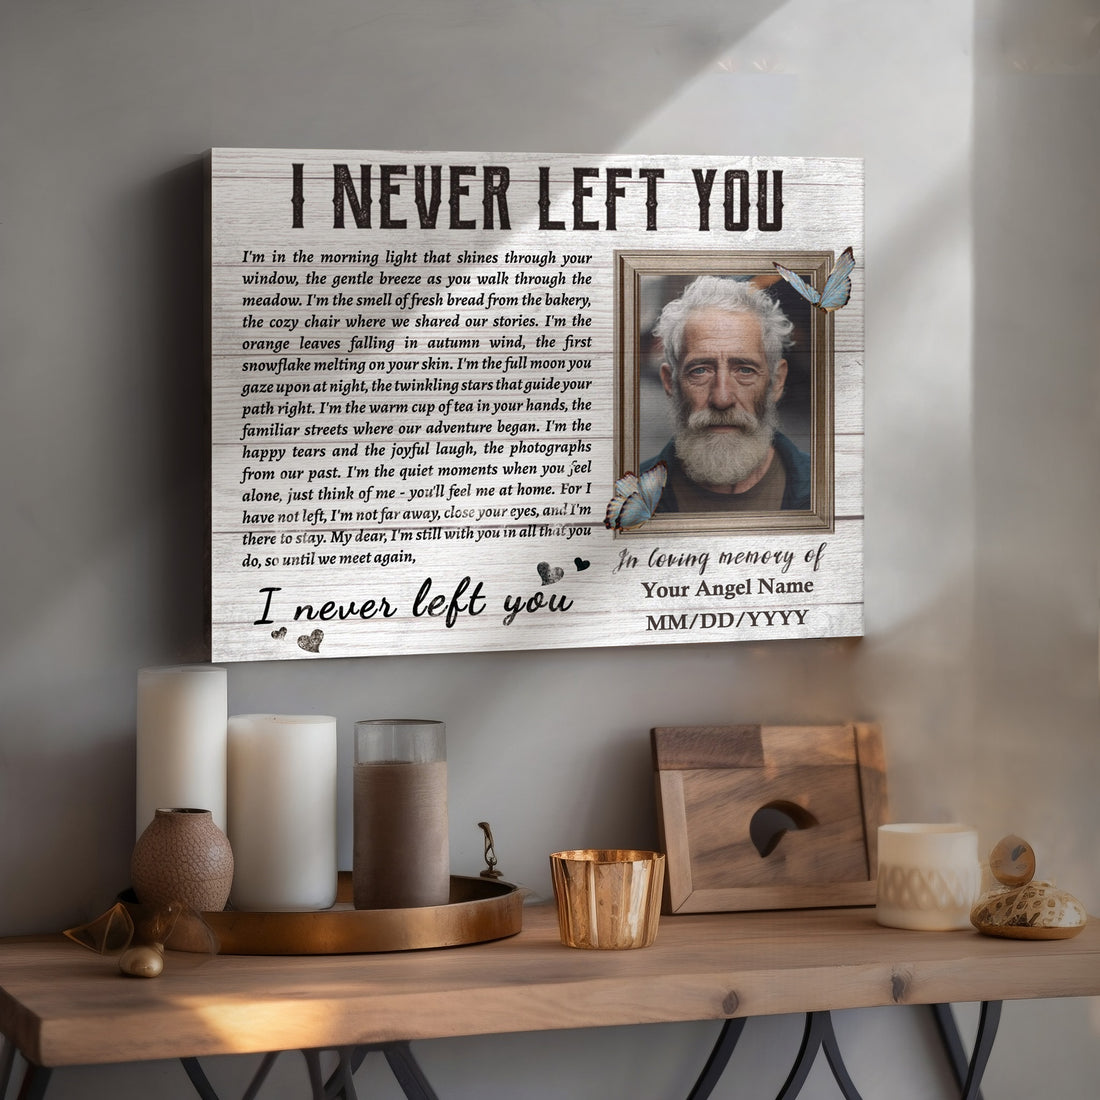 I Never Left You - Personalized Photo Canvas Print Sympathy Gifts